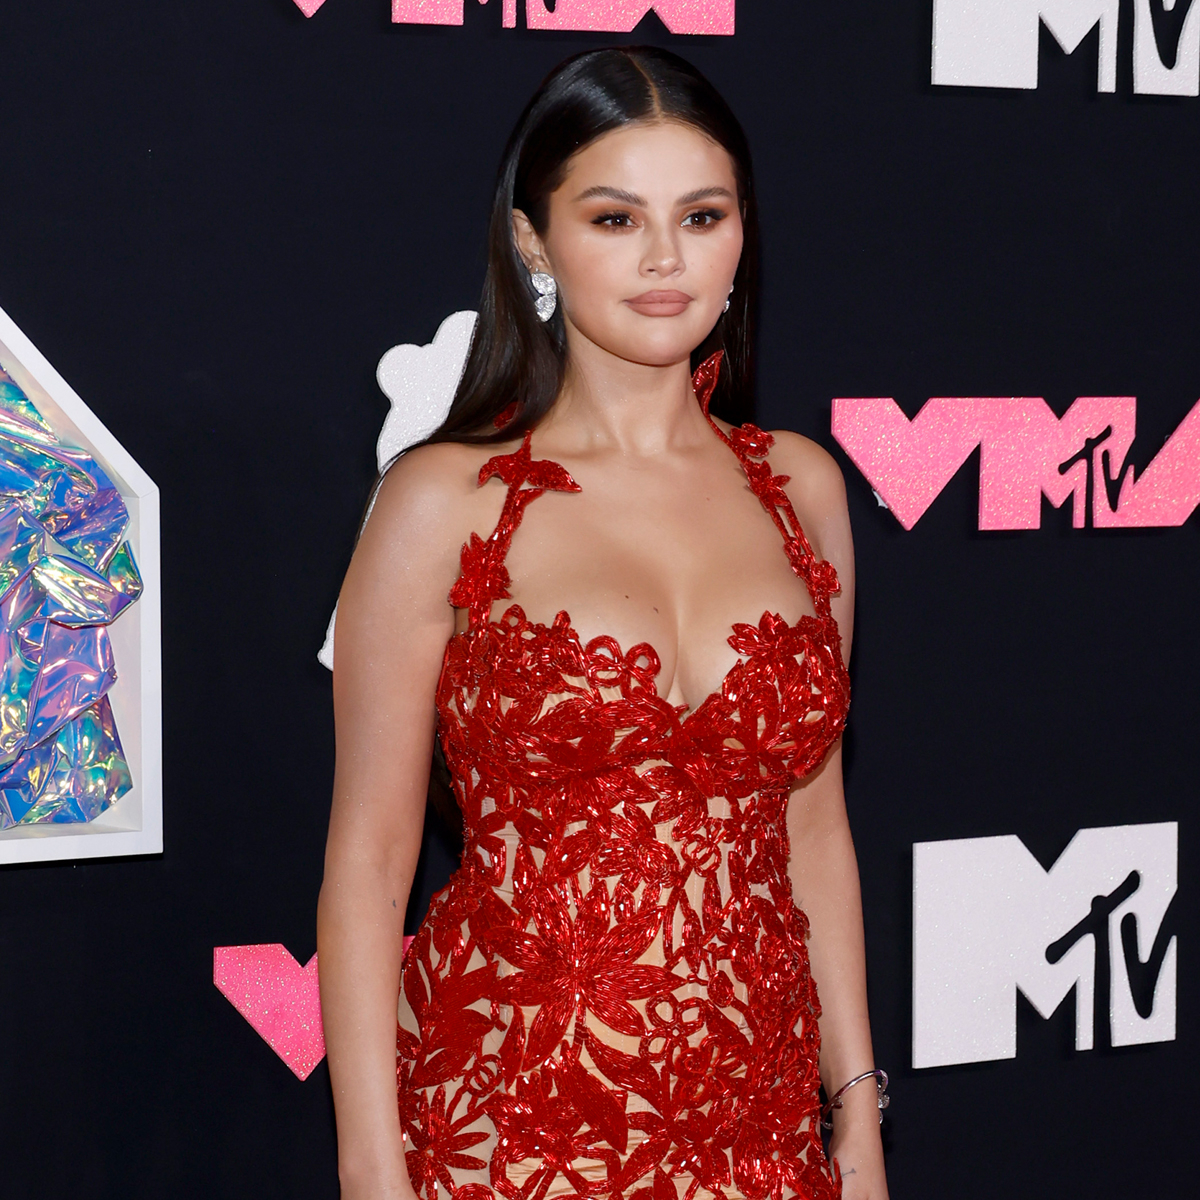 When You’re Ready Come & Get a Look at Selena Gomez’s Best VMAs Outfit